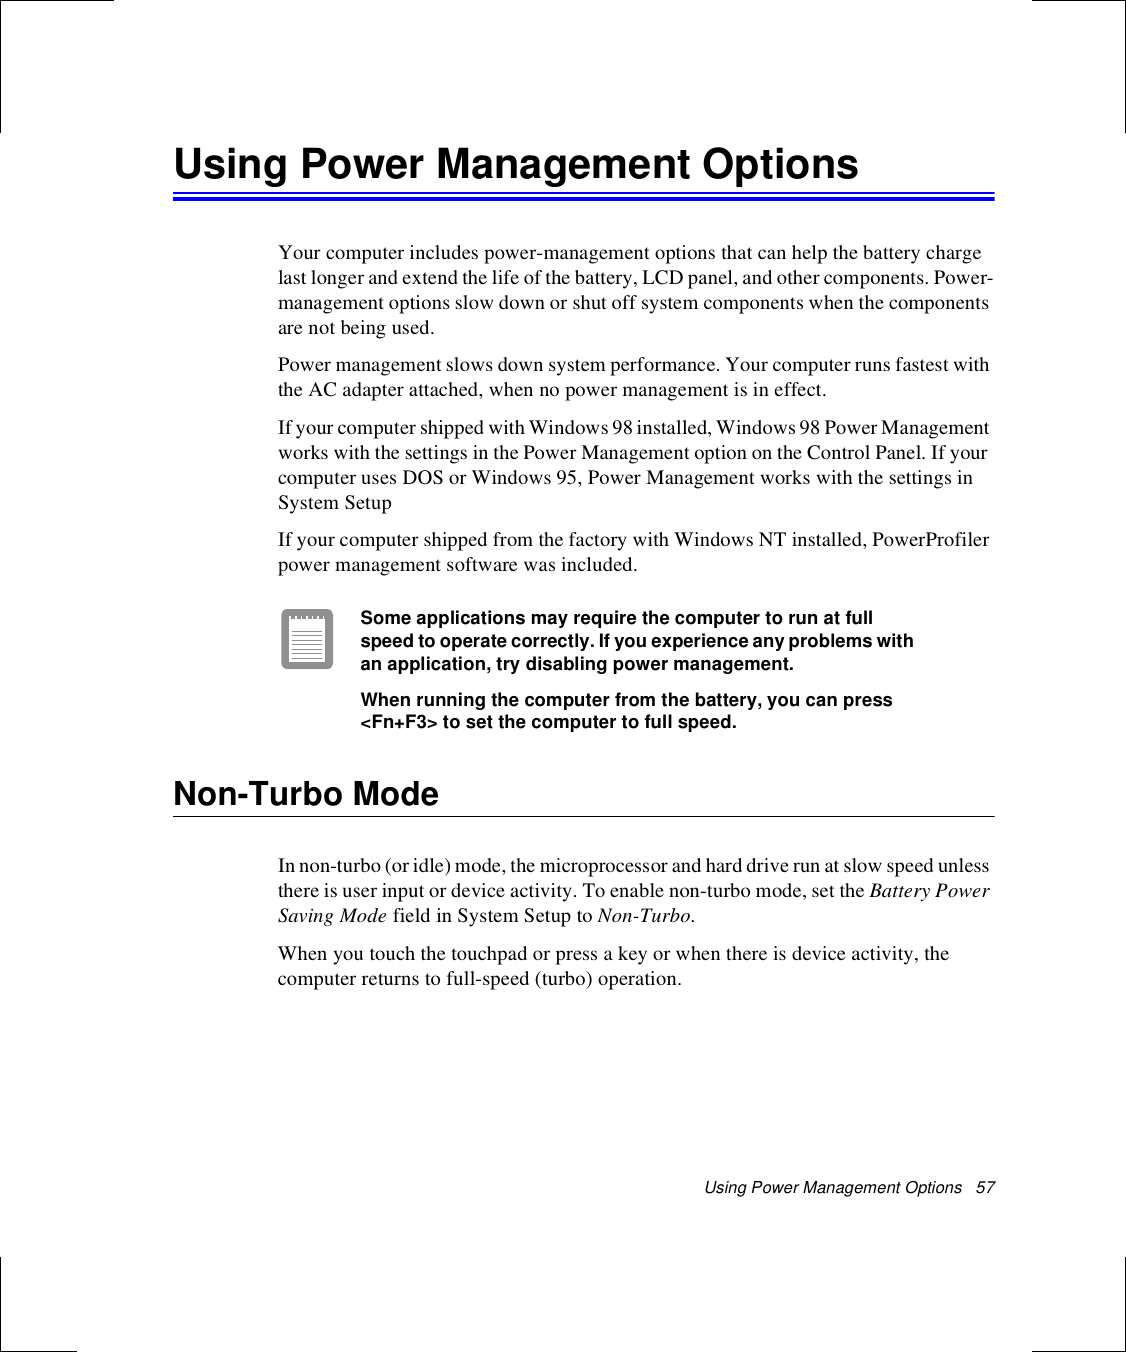 Using Power Management Options   57Using Power Management OptionsYour computer includes power-management options that can help the battery charge last longer and extend the life of the battery, LCD panel, and other components. Power-management options slow down or shut off system components when the components are not being used. Power management slows down system performance. Your computer runs fastest with the AC adapter attached, when no power management is in effect.If your computer shipped with Windows 98 installed, Windows 98 Power Management works with the settings in the Power Management option on the Control Panel. If your computer uses DOS or Windows 95, Power Management works with the settings in System SetupIf your computer shipped from the factory with Windows NT installed, PowerProfiler power management software was included. Some applications may require the computer to run at full speed to operate correctly. If you experience any problems with an application, try disabling power management.When running the computer from the battery, you can press &lt;Fn+F3&gt; to set the computer to full speed. Non-Turbo ModeIn non-turbo (or idle) mode, the microprocessor and hard drive run at slow speed unless there is user input or device activity. To enable non-turbo mode, set the Battery Power Saving Mode field in System Setup to Non-Turbo.When you touch the touchpad or press a key or when there is device activity, the computer returns to full-speed (turbo) operation.